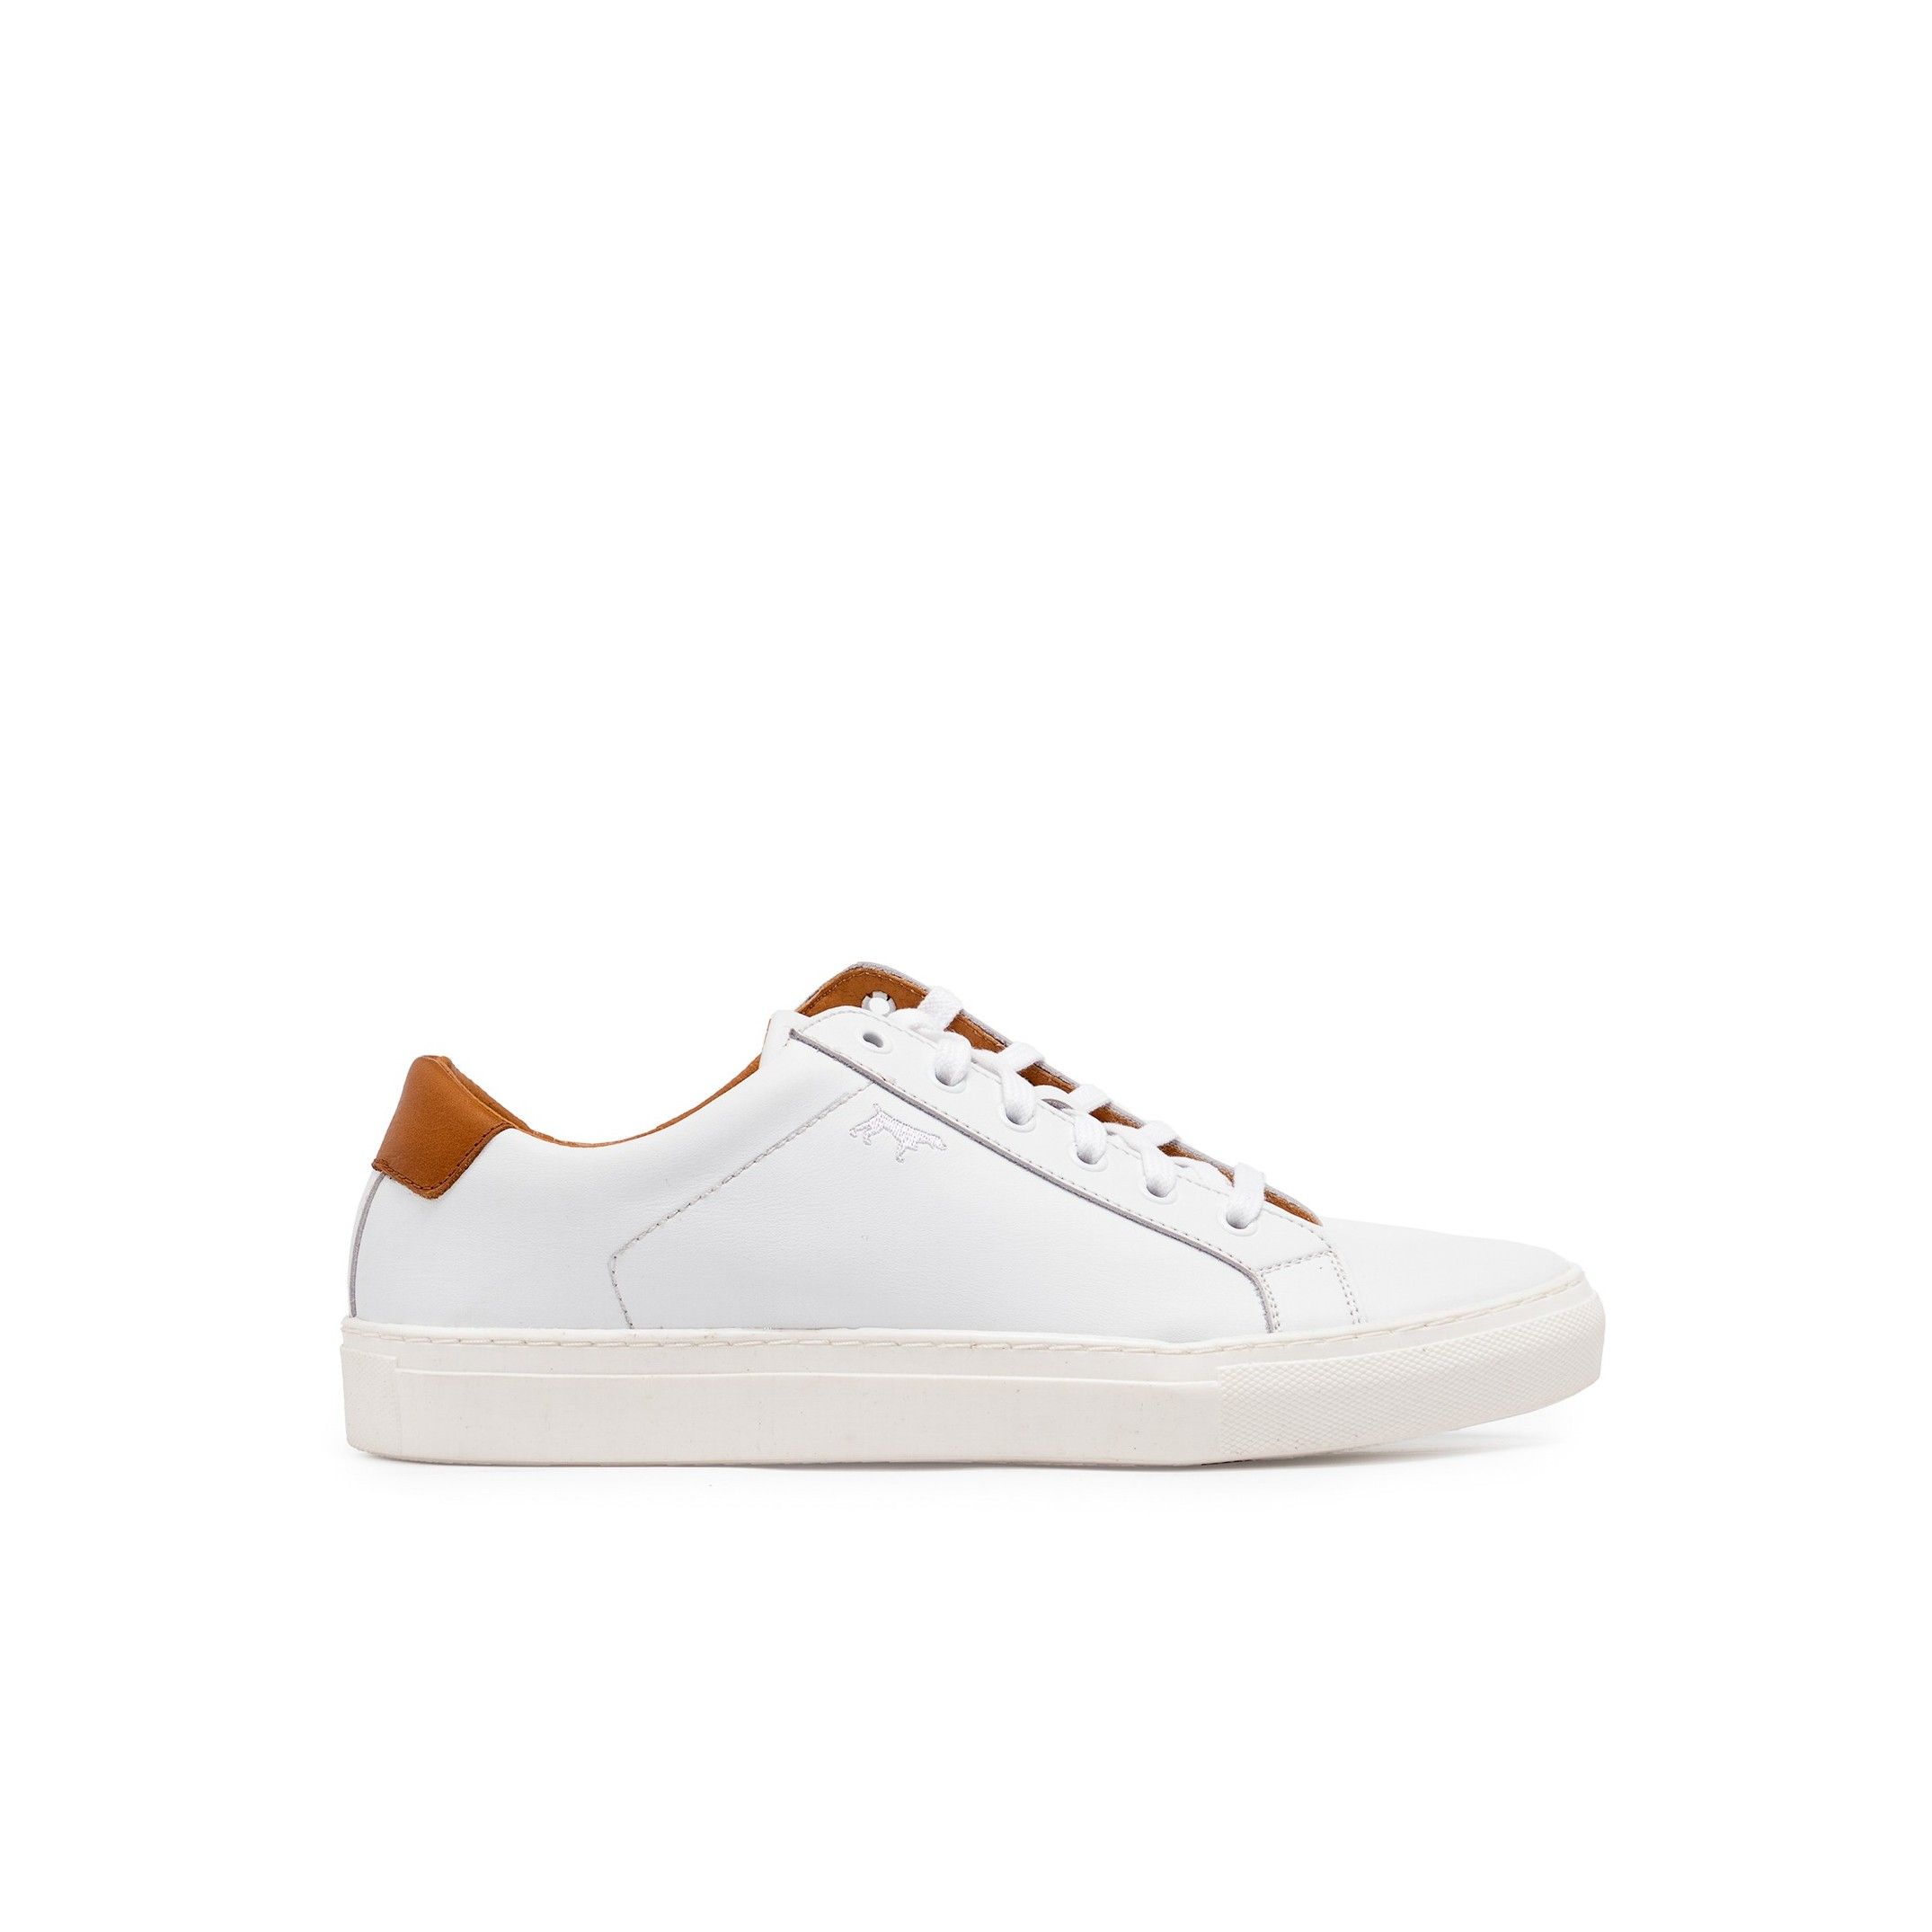 Nappa leather sneakers with laces for men by Son Castellanisimos. Upper made of cowhide leather. Cotton laces closure. Inner lining and insole: Antiallergic and keeps the inside of the footwear dry. Sole material: synthetic and non slip. Heel height: 2,5 cm. Designed and made in Spain.